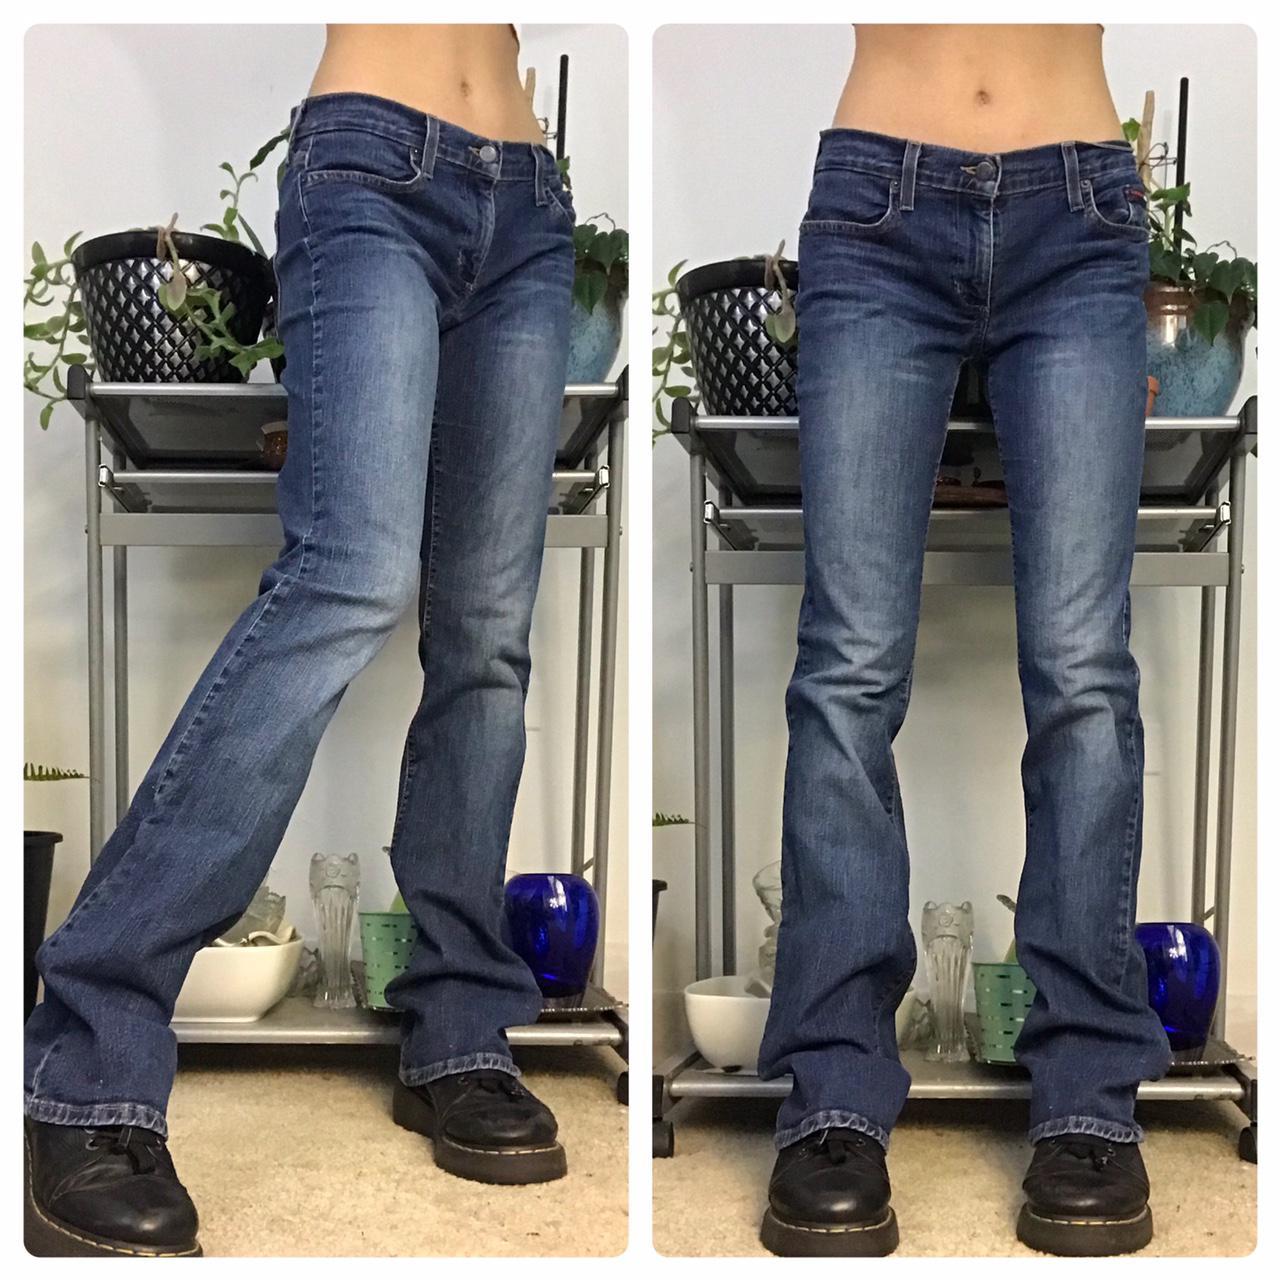 Tommy Hilfiger Women's Navy and Blue Jeans (2)